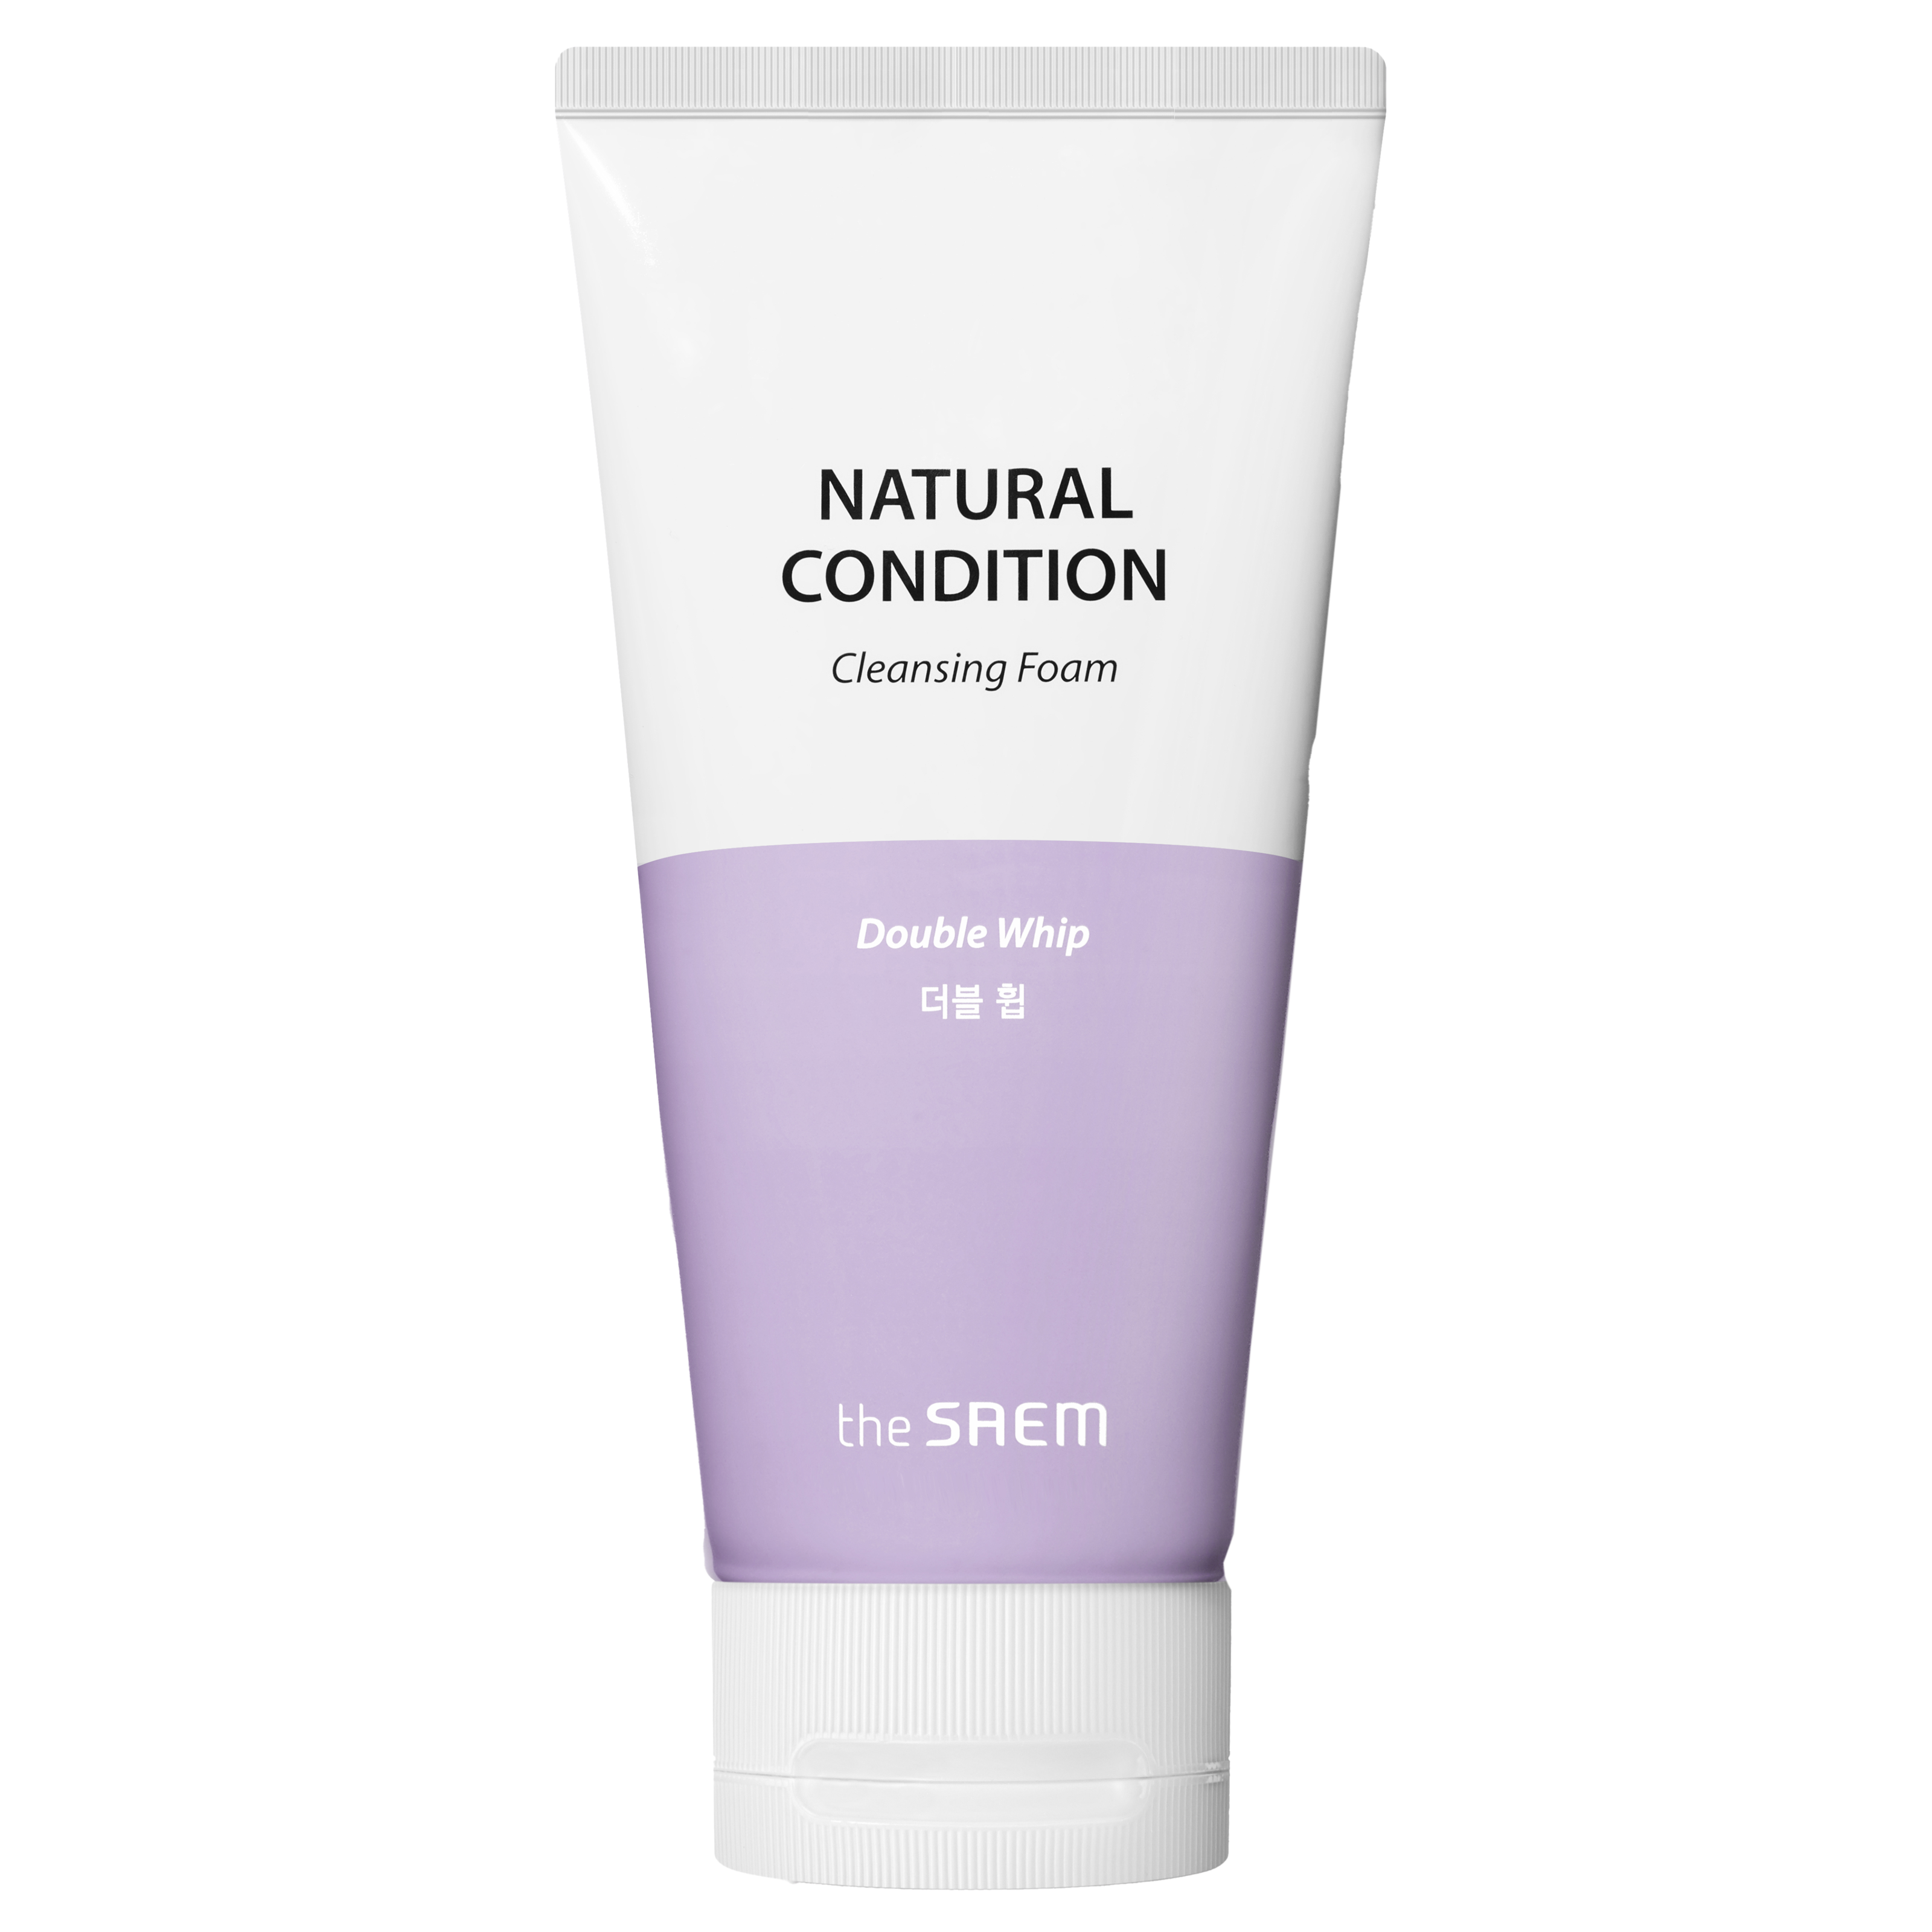 Läs mer om The Saem Natural Condition Cleansing Foam [Double Whip] Espuma Limpiad